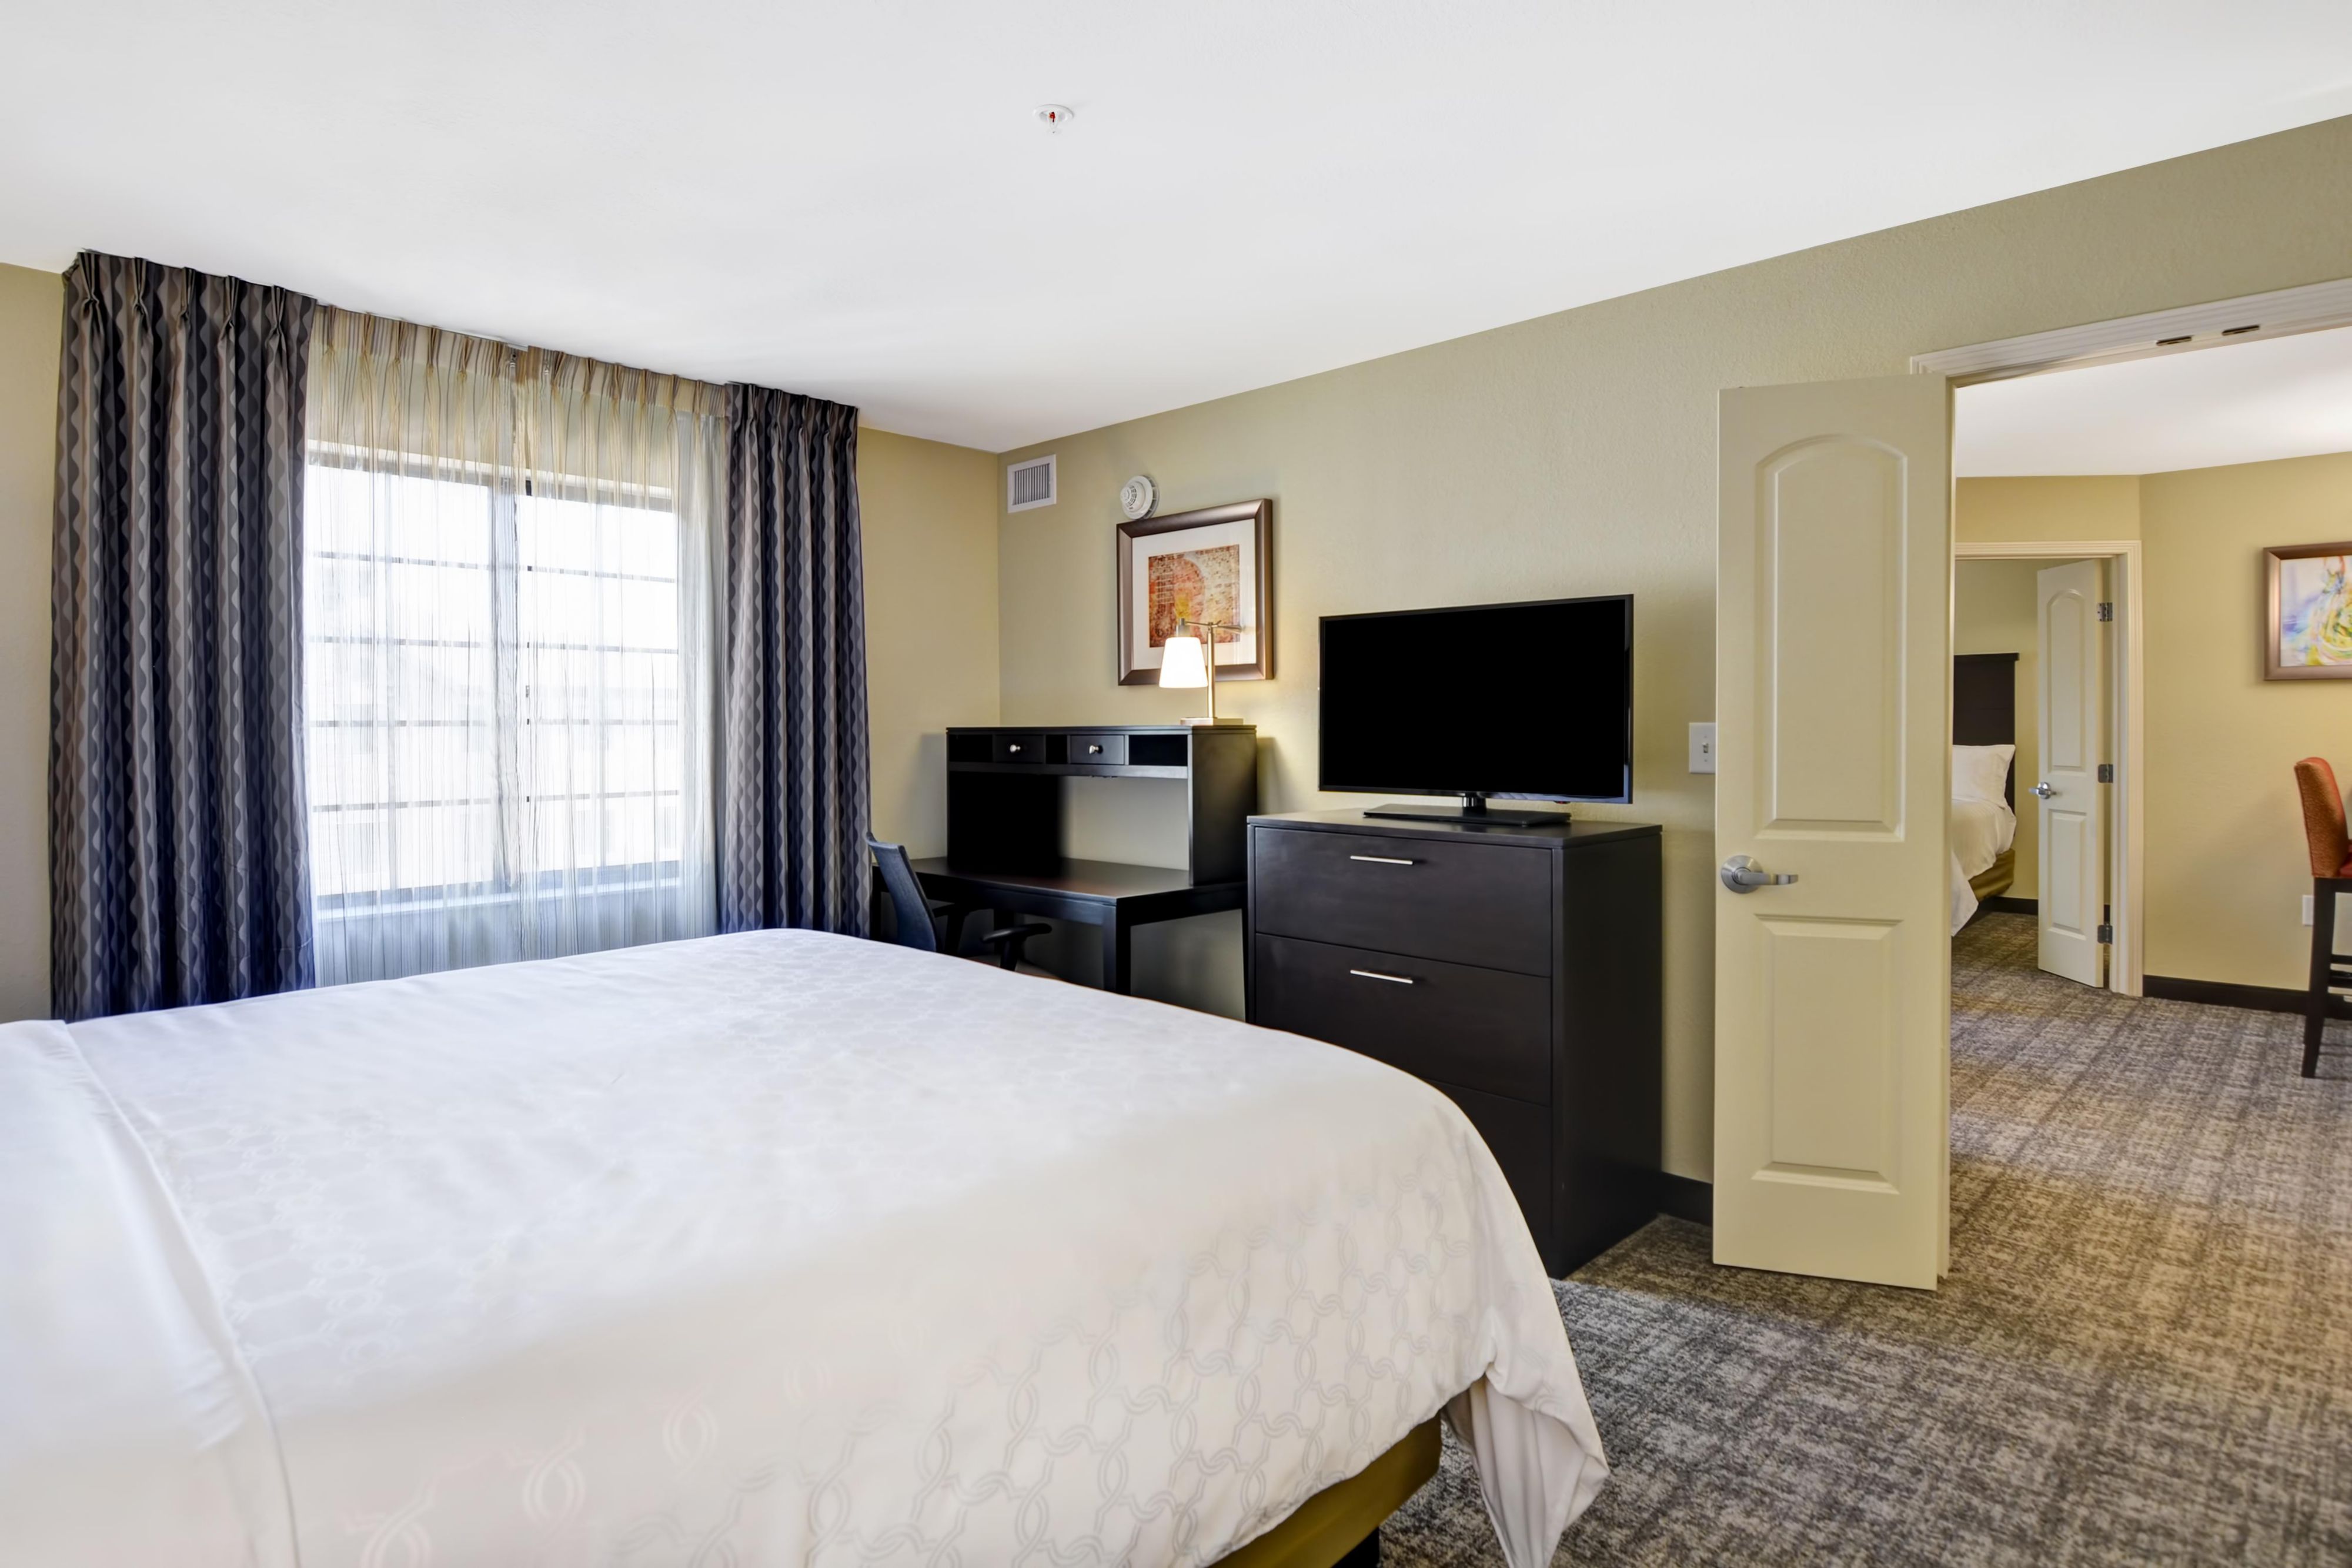 Stretch out in our one- and two-bedroom suites, just minutes from Nashville. Our suites offer full kitchens, living areas, and ergonomic workspaces. Feel at home with flat-screen HDTVs, complimentary Wi-Fi, refrigerators, and plenty of space for work, play, and extended stays.